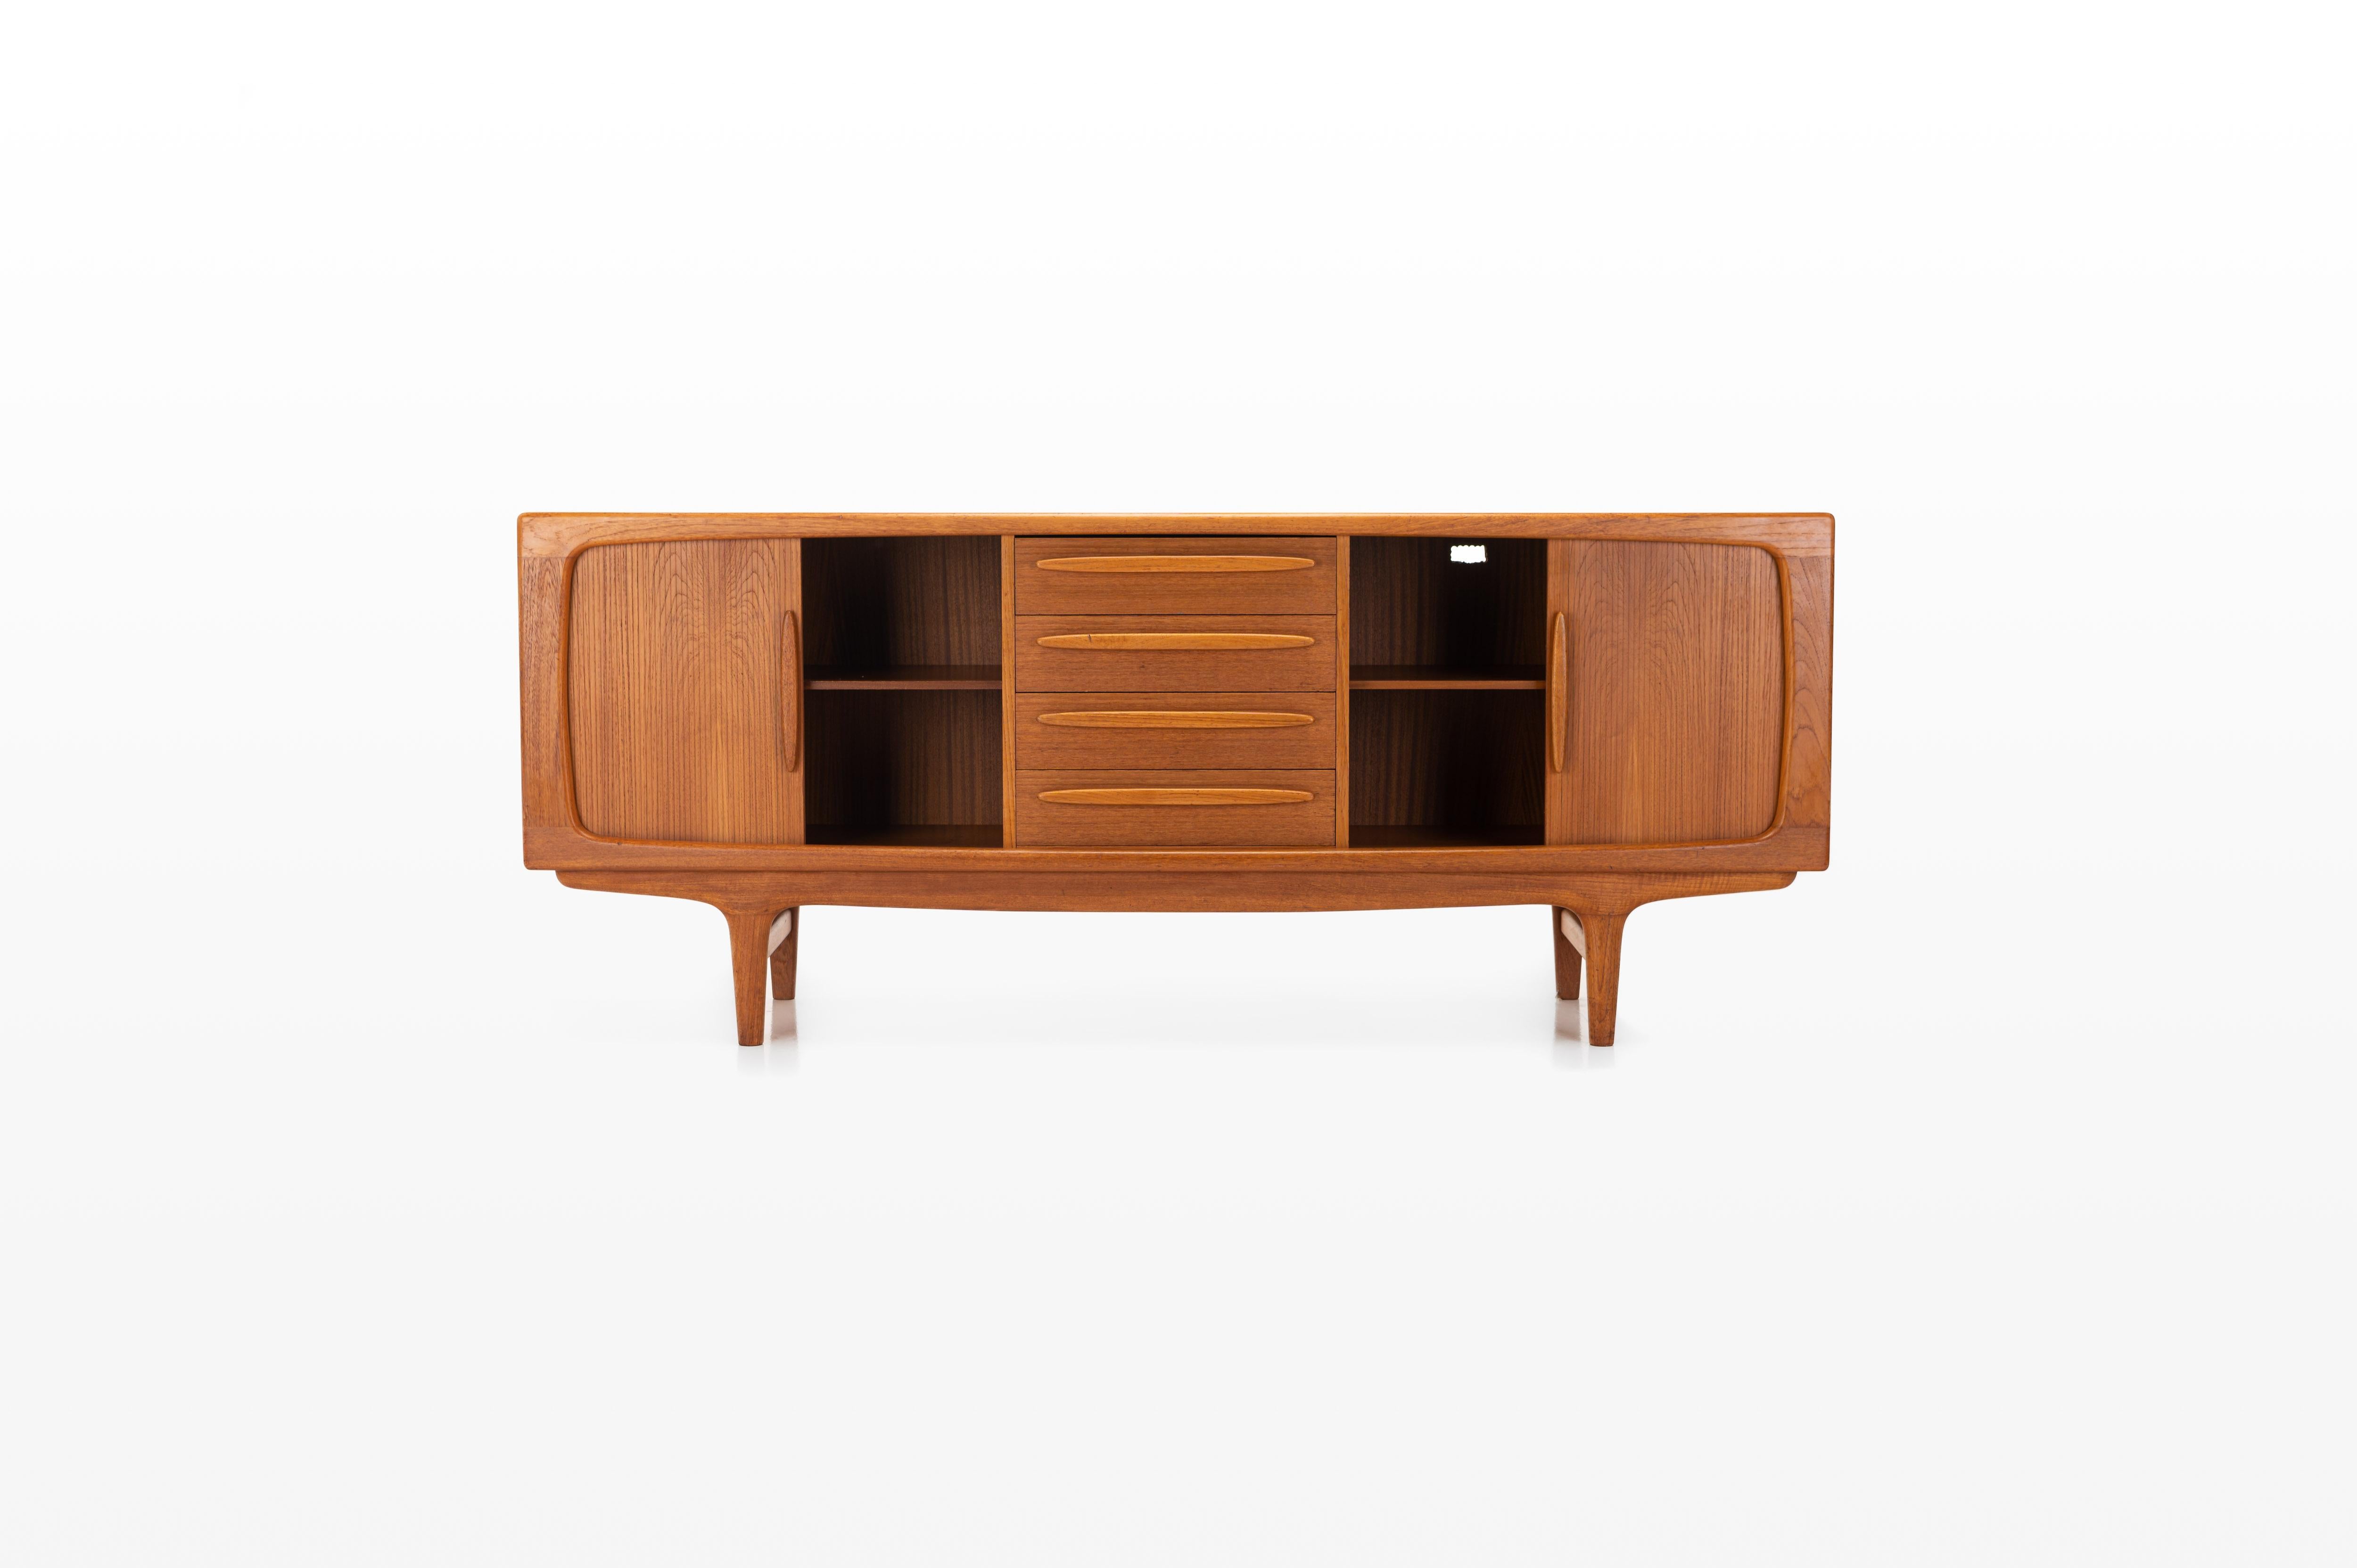 Danish vintage sideboard designed in the 1960s in Denmark by Johannes Andersen for CFC Silkeborg Denmark. Teak version with tambour doors and four drawers.